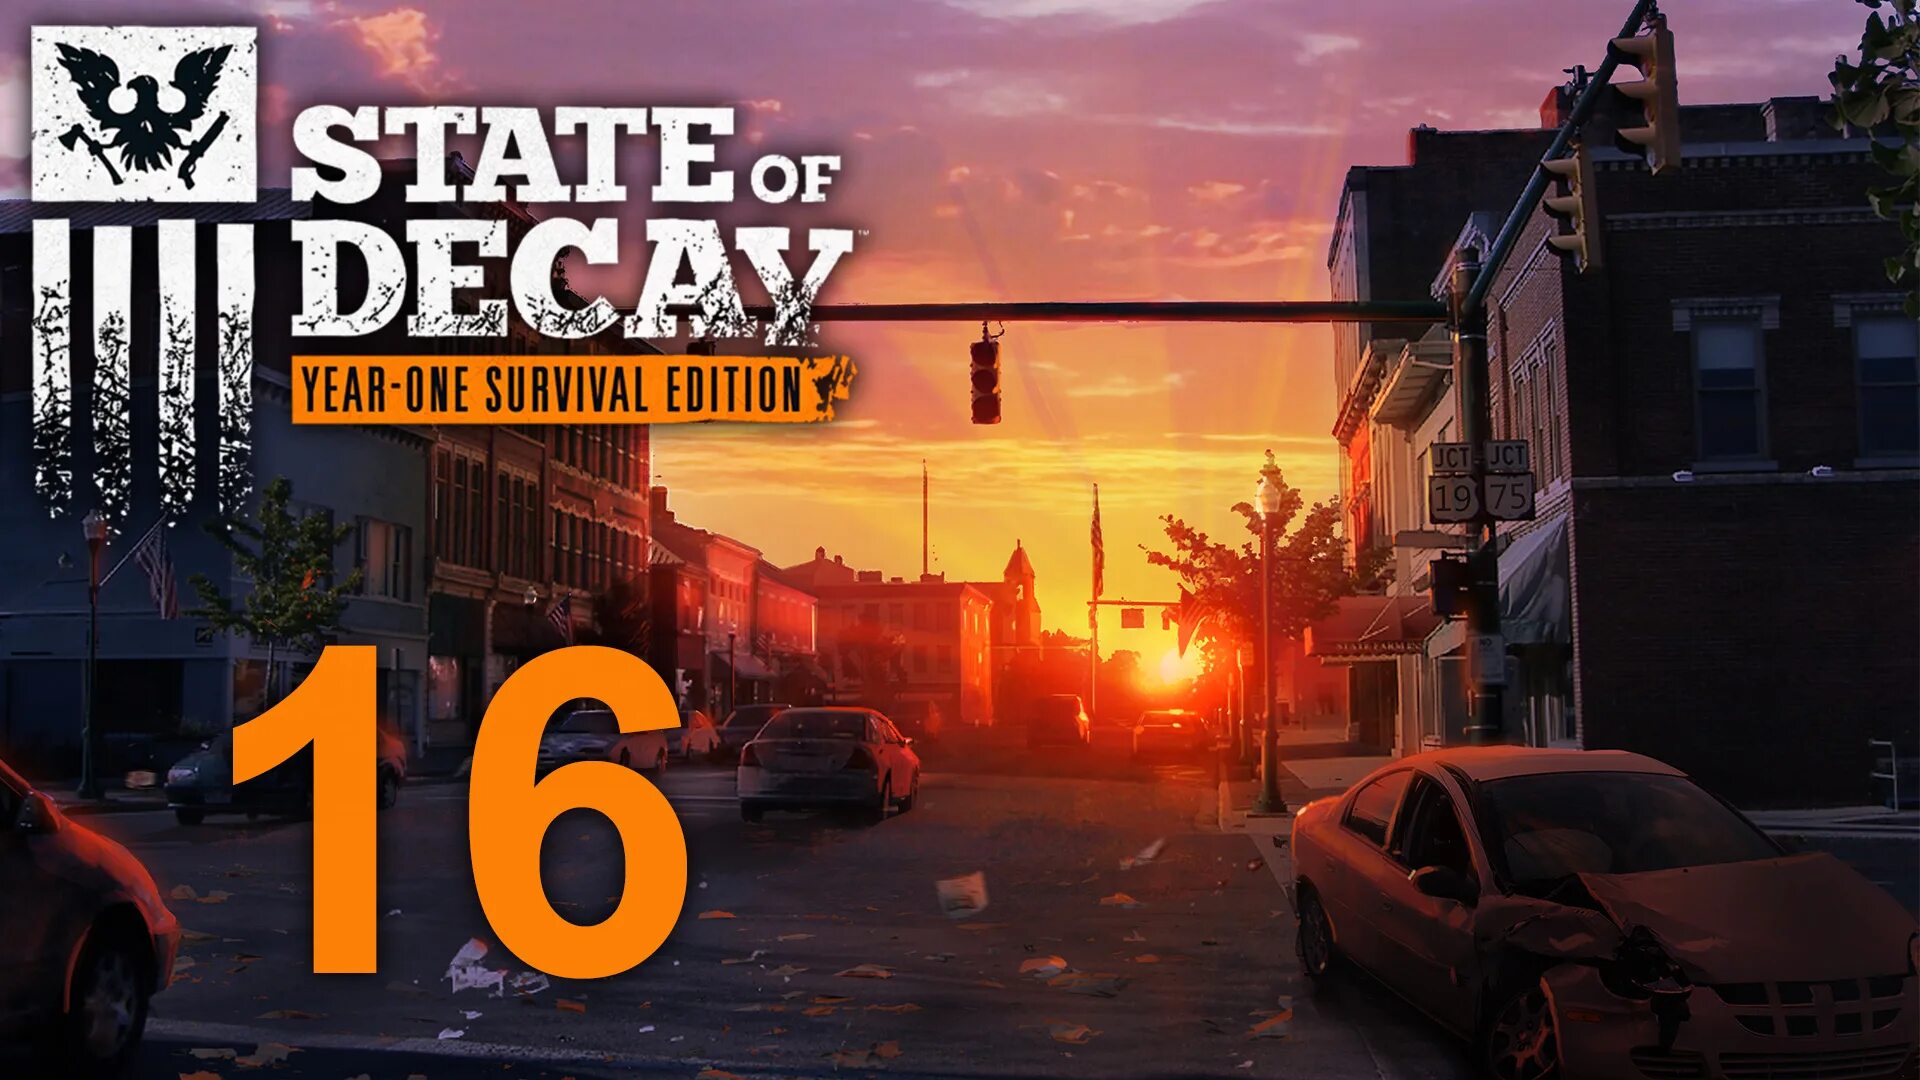 State of Decay прохождение. State of Decay 1 прохождение. State of Decay прохождение на русском. State of Decay yose - Day one Edition. Прохождение state